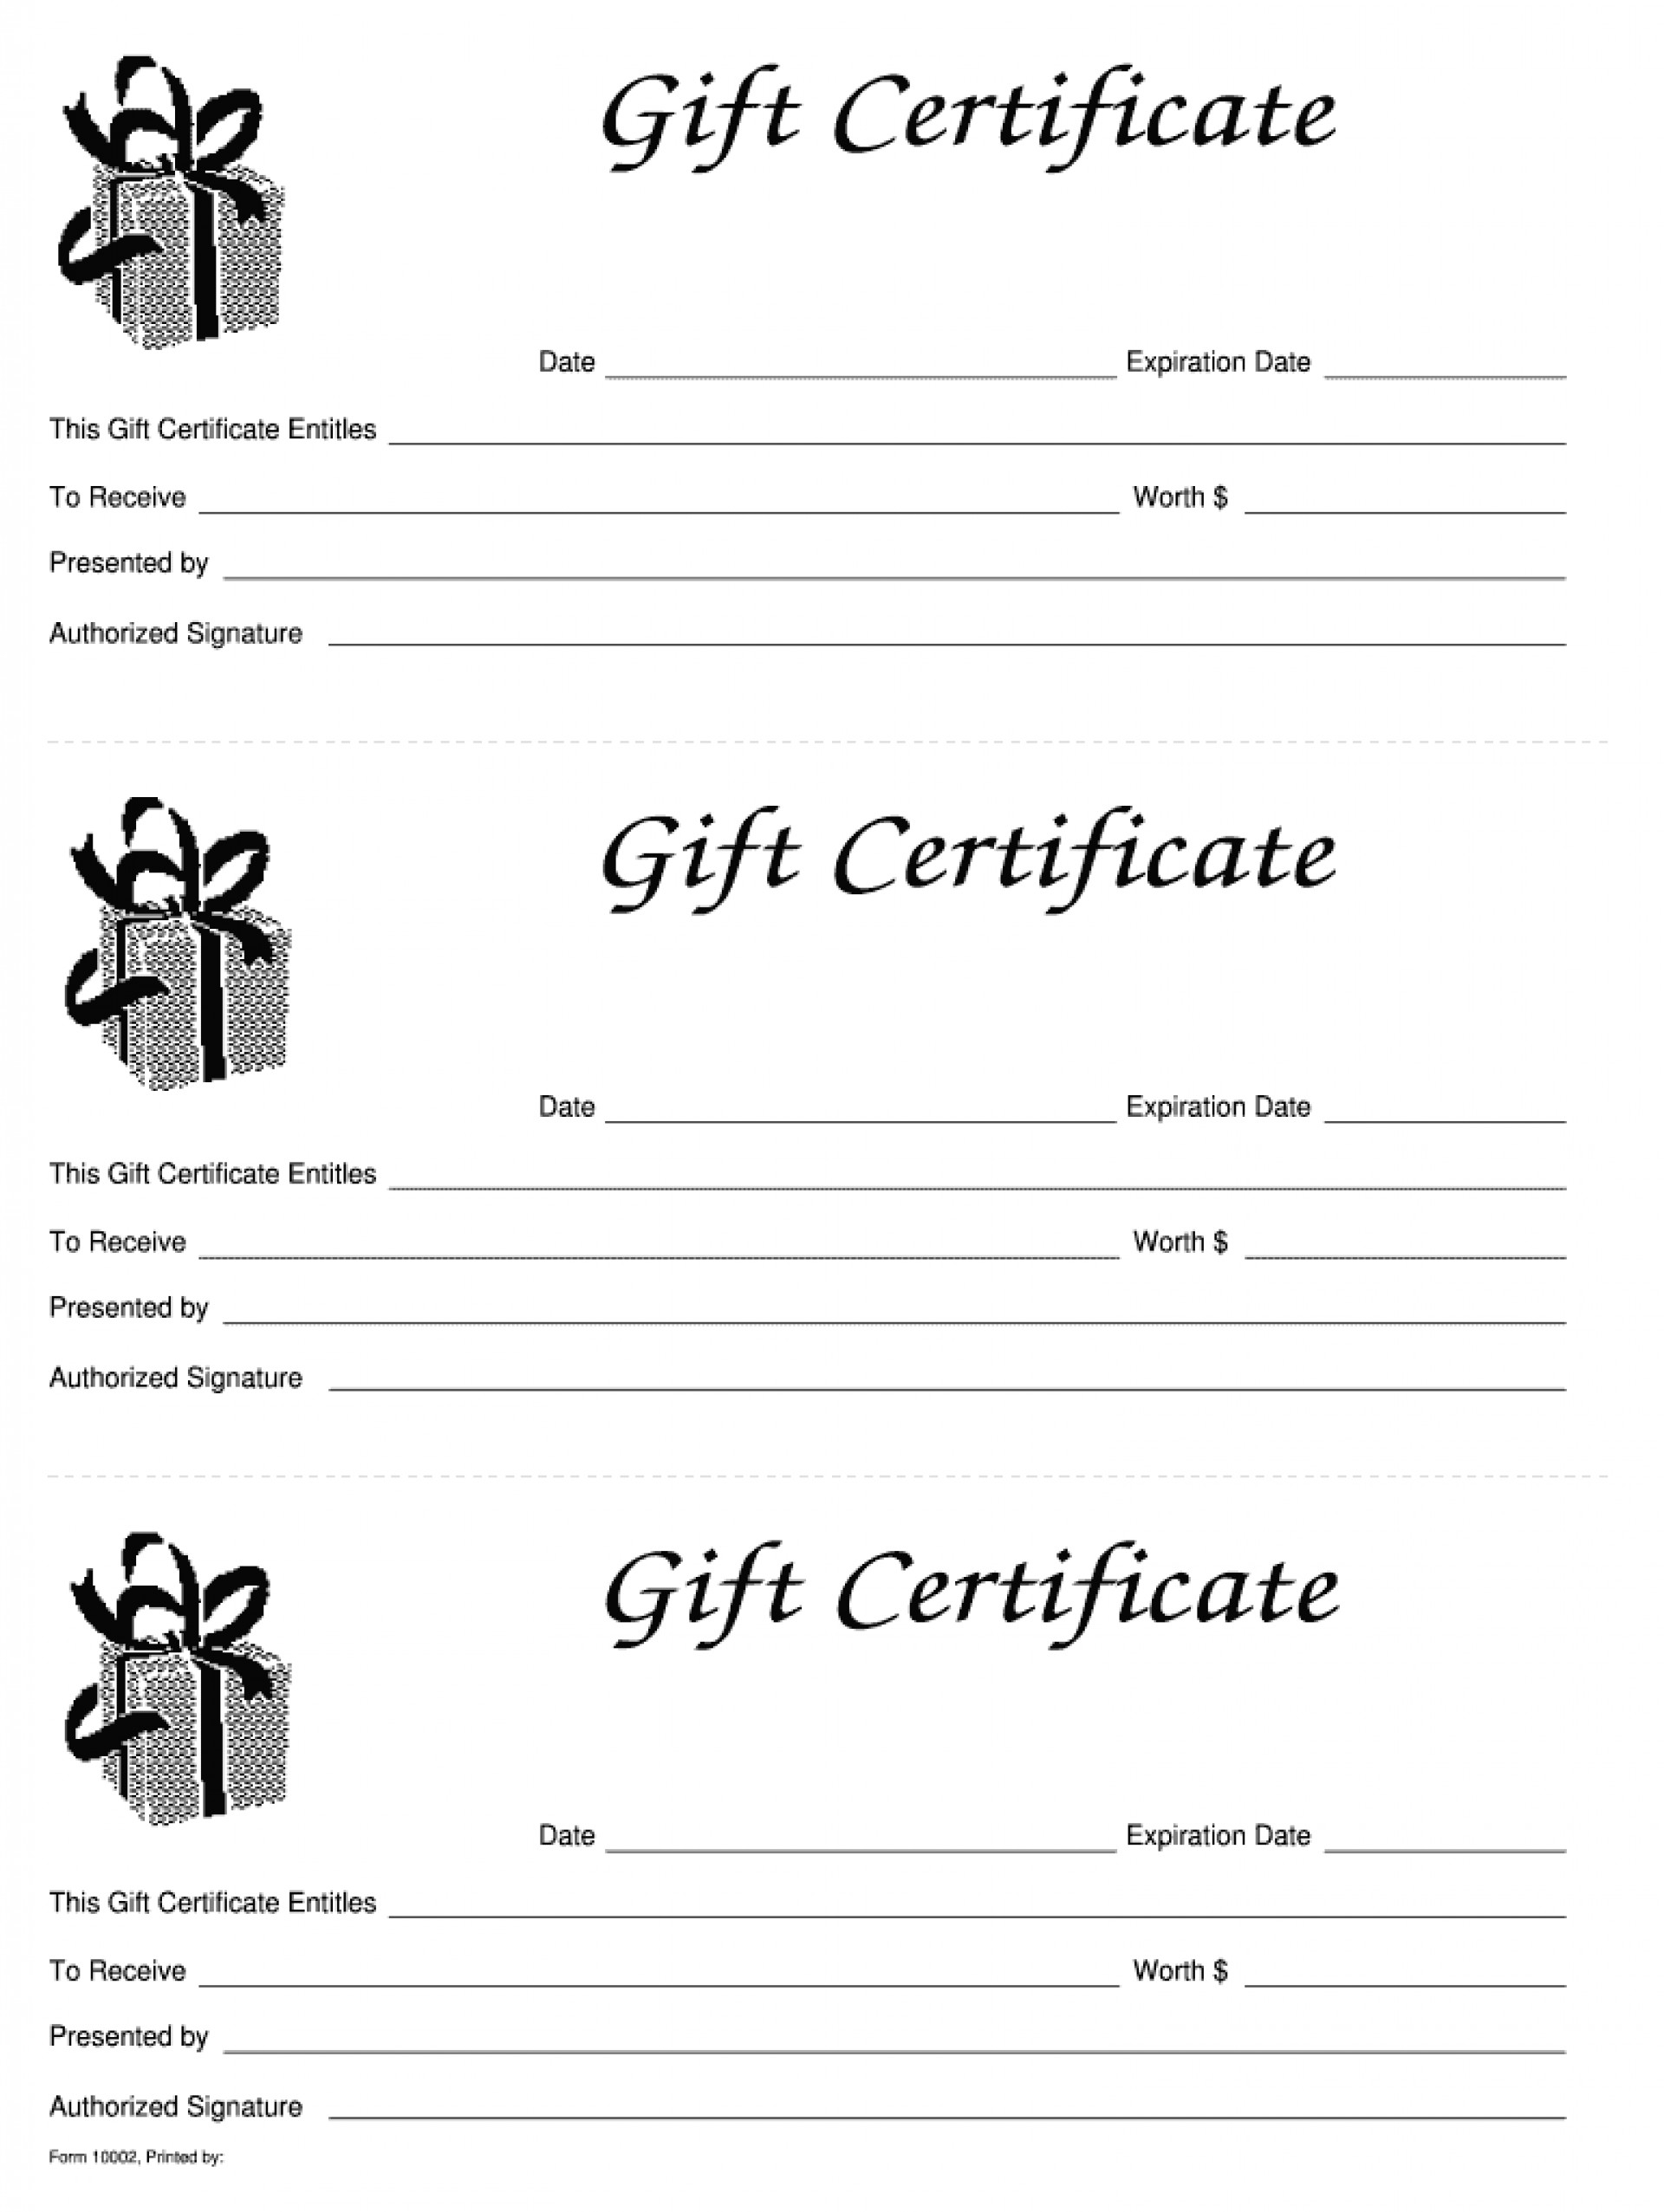 012 Gift Certificate Template Free Remarkable Ideas Massage Regarding Custom Gift Certificate Template